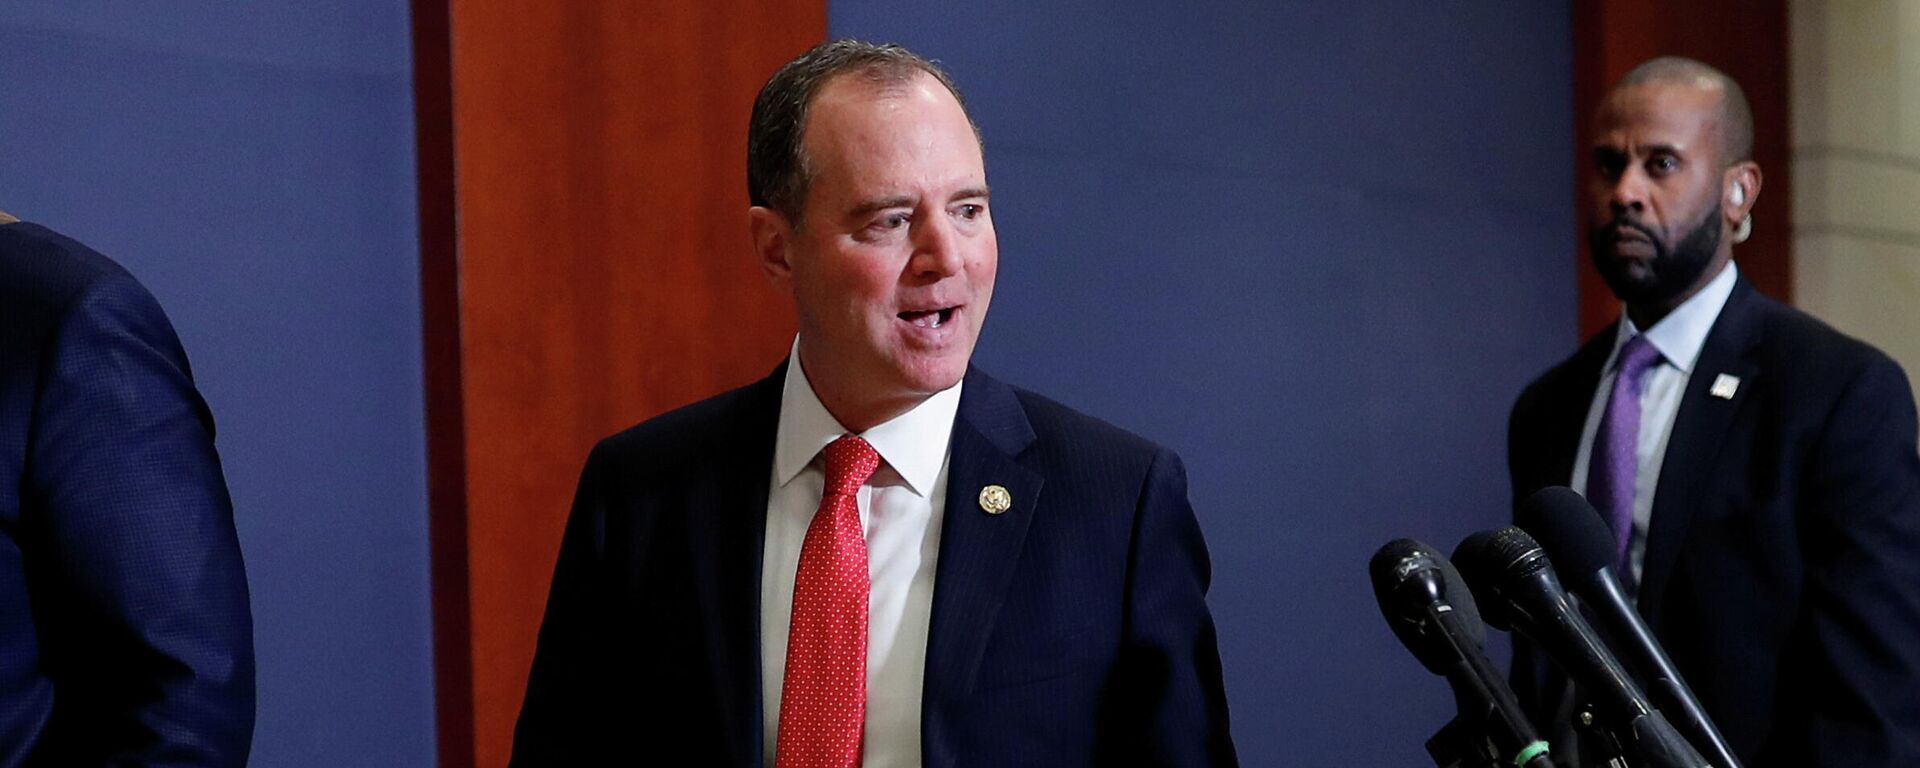 House Intelligence Committee Chairman Adam Schiff (D-CA) arrives for a national security briefing before members of the House of Representatives on Capitol Hill in Washington, D.C., March 10, 2020 - Sputnik International, 1920, 27.10.2021